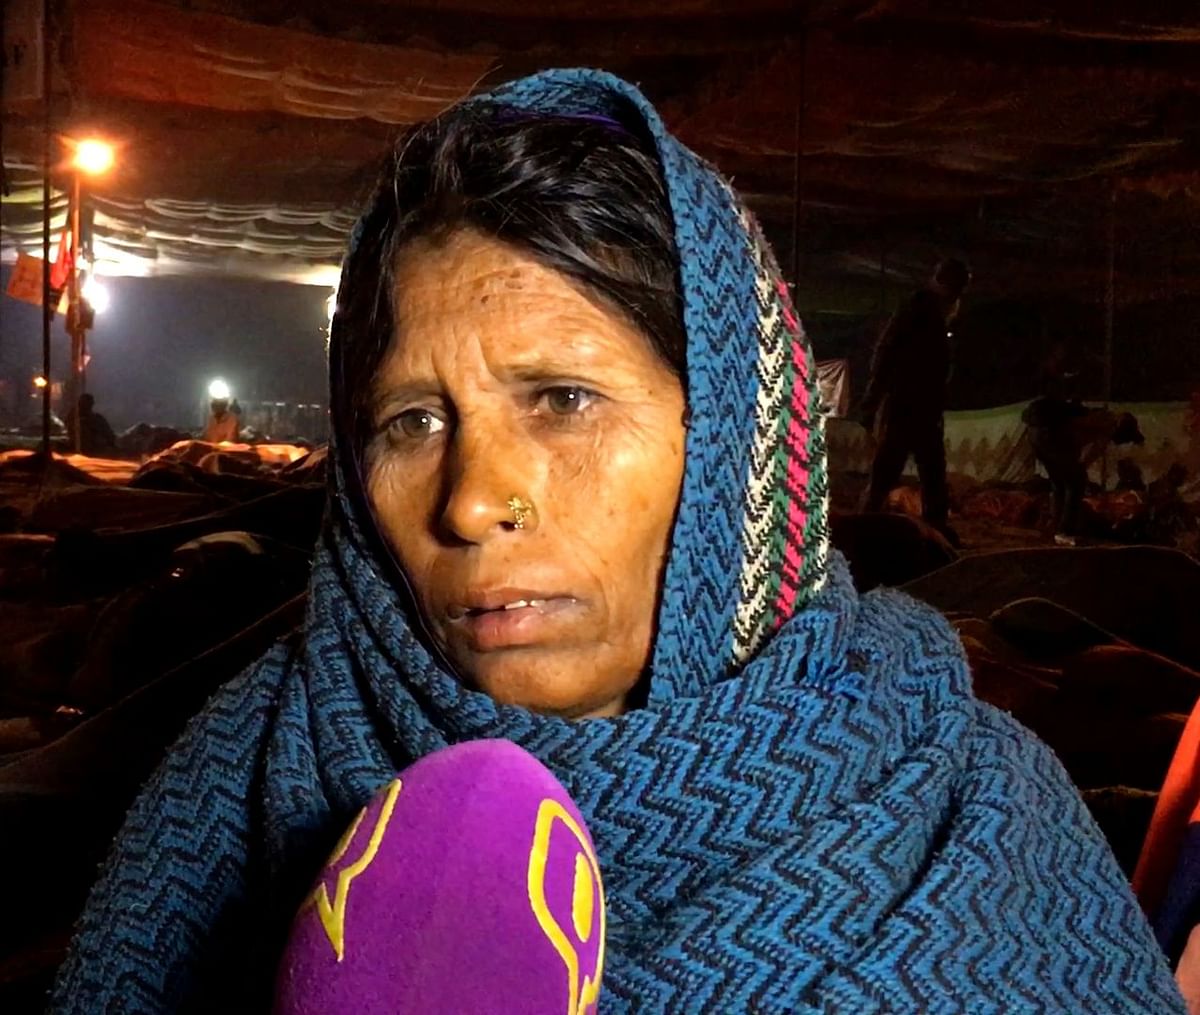 At the Kisan Mukti March, The Quint speaks to distressed farmers, who speak about their struggles like farm loans.